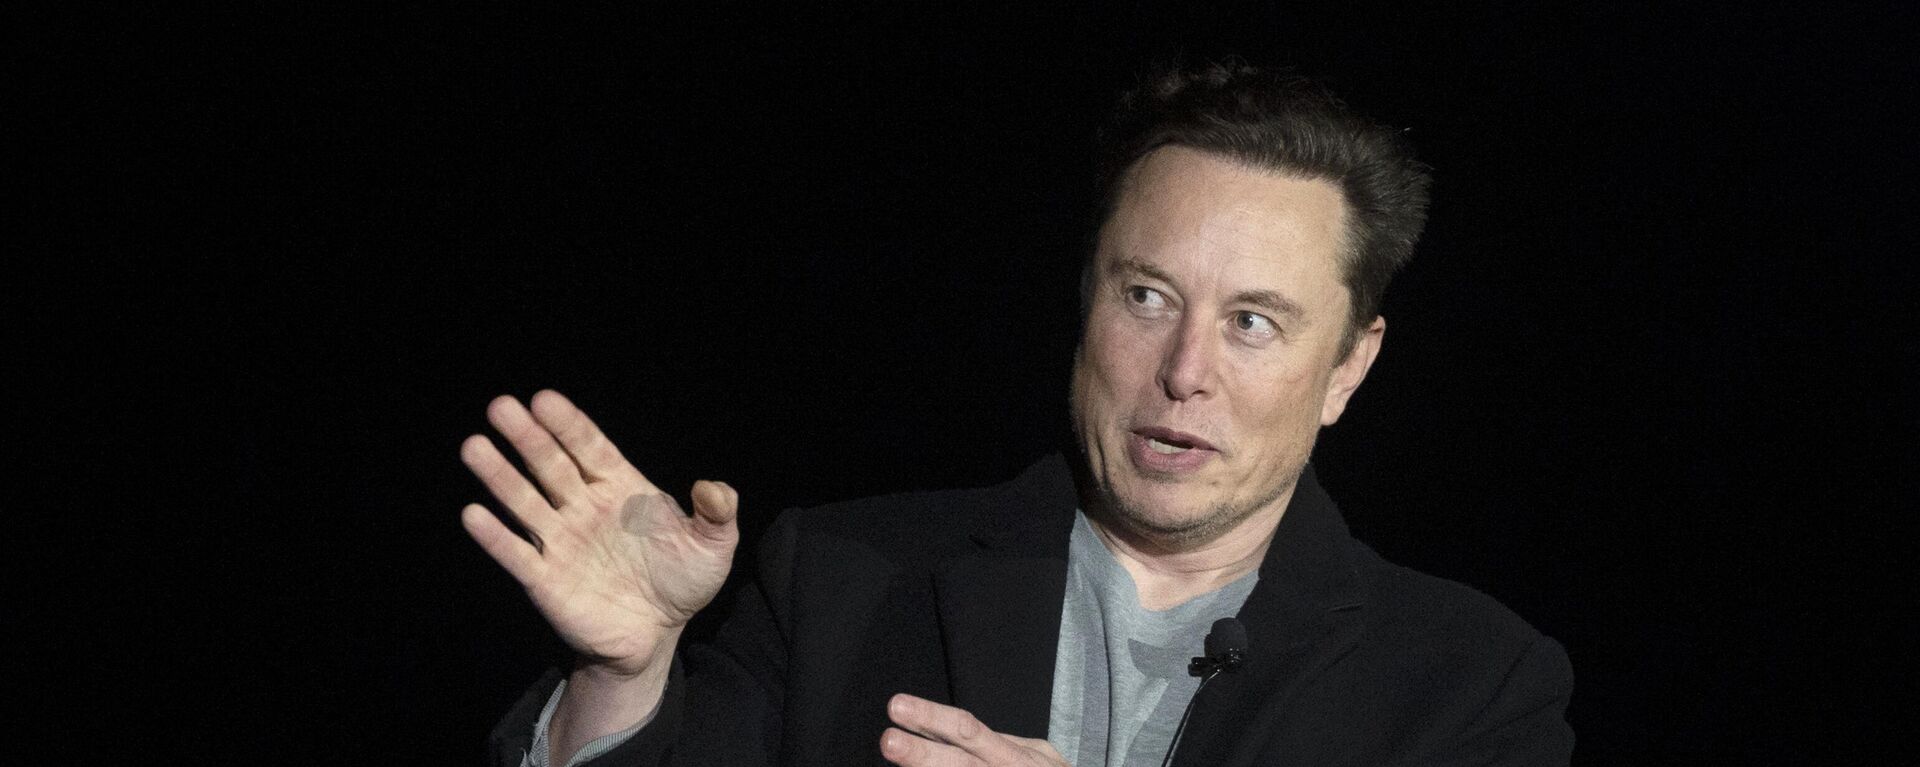 Elon Musk gestures as he speaks during a press conference at SpaceX's Starbase facility near Boca Chica Village in South Texas, on February 10, 2022. - Sputnik International, 1920, 21.01.2023